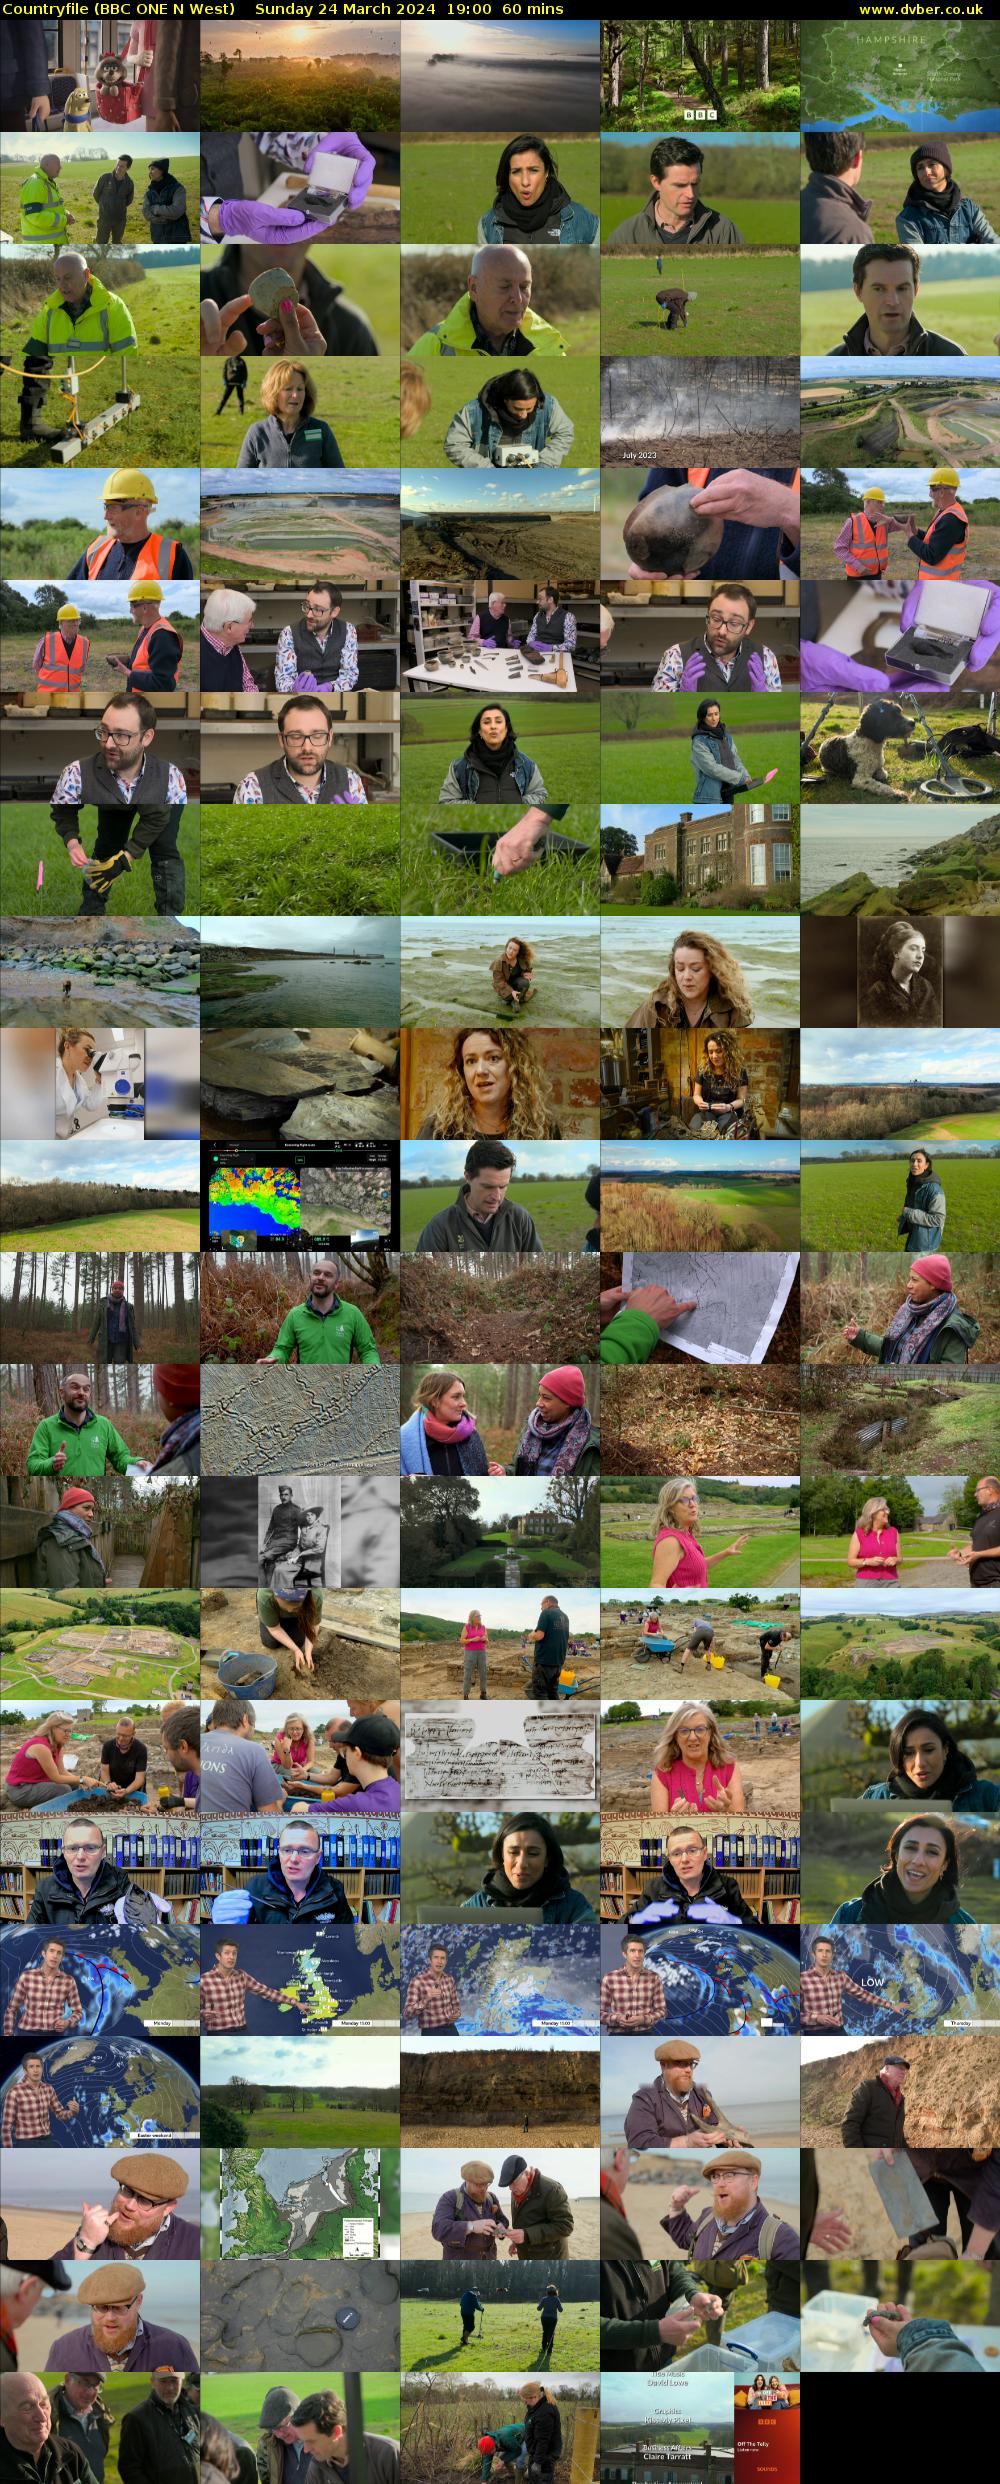 Countryfile (BBC ONE N West) Sunday 24 March 2024 19:00 - 20:00